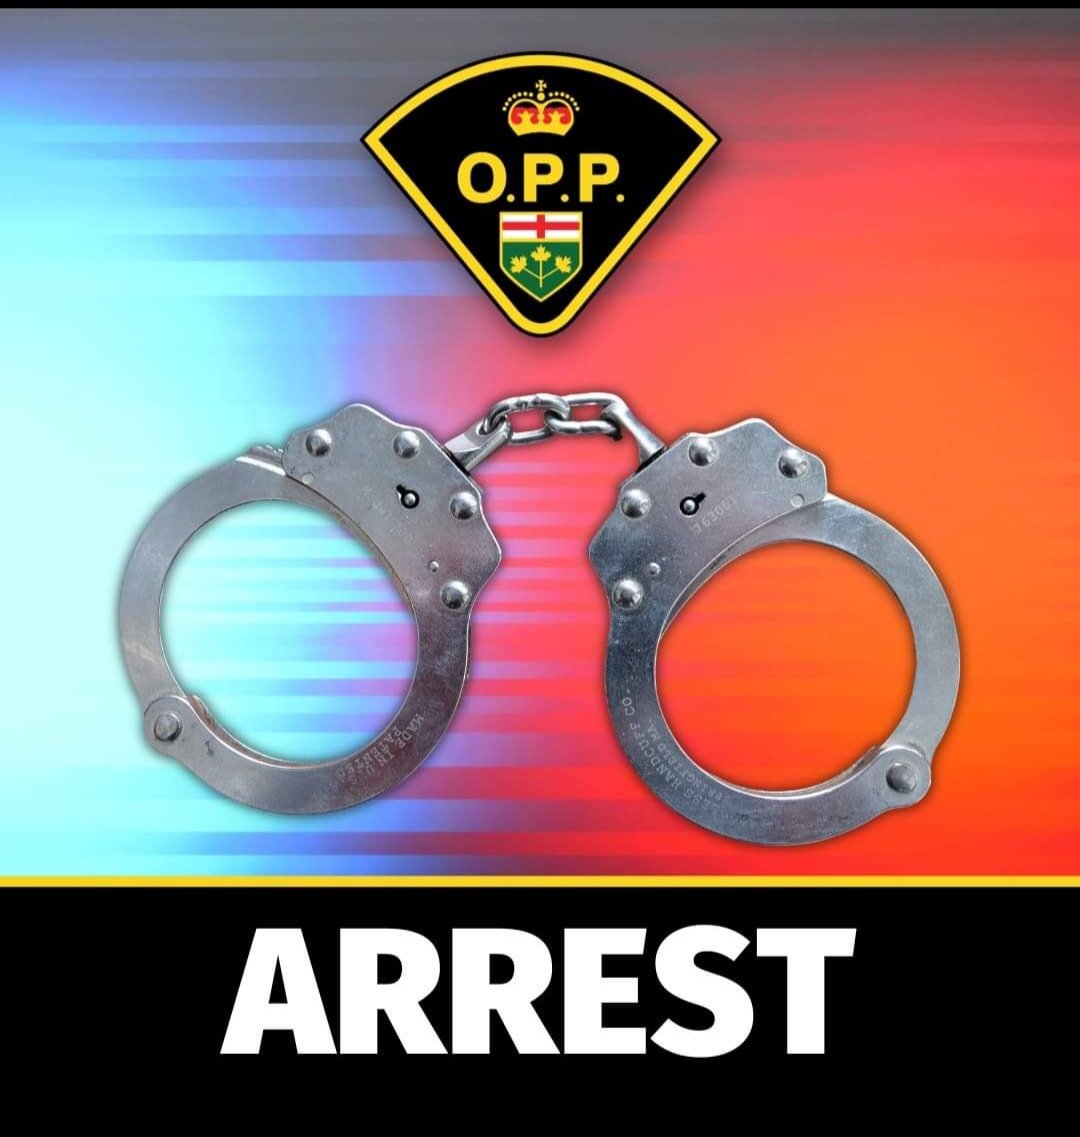 At 8:30 pm Tues #407OPP stopped a vehicle going 174 kph at #Hwy407 WB /#Hwy27 and arrested & charged a 47 yr old male from Woodbridge with #StuntDriving #FailToComplyWithDemand & multiple HTA charges. #90DayLicenseSuspension,  #14DayVehicleImpound &  criminal court date. ^nm